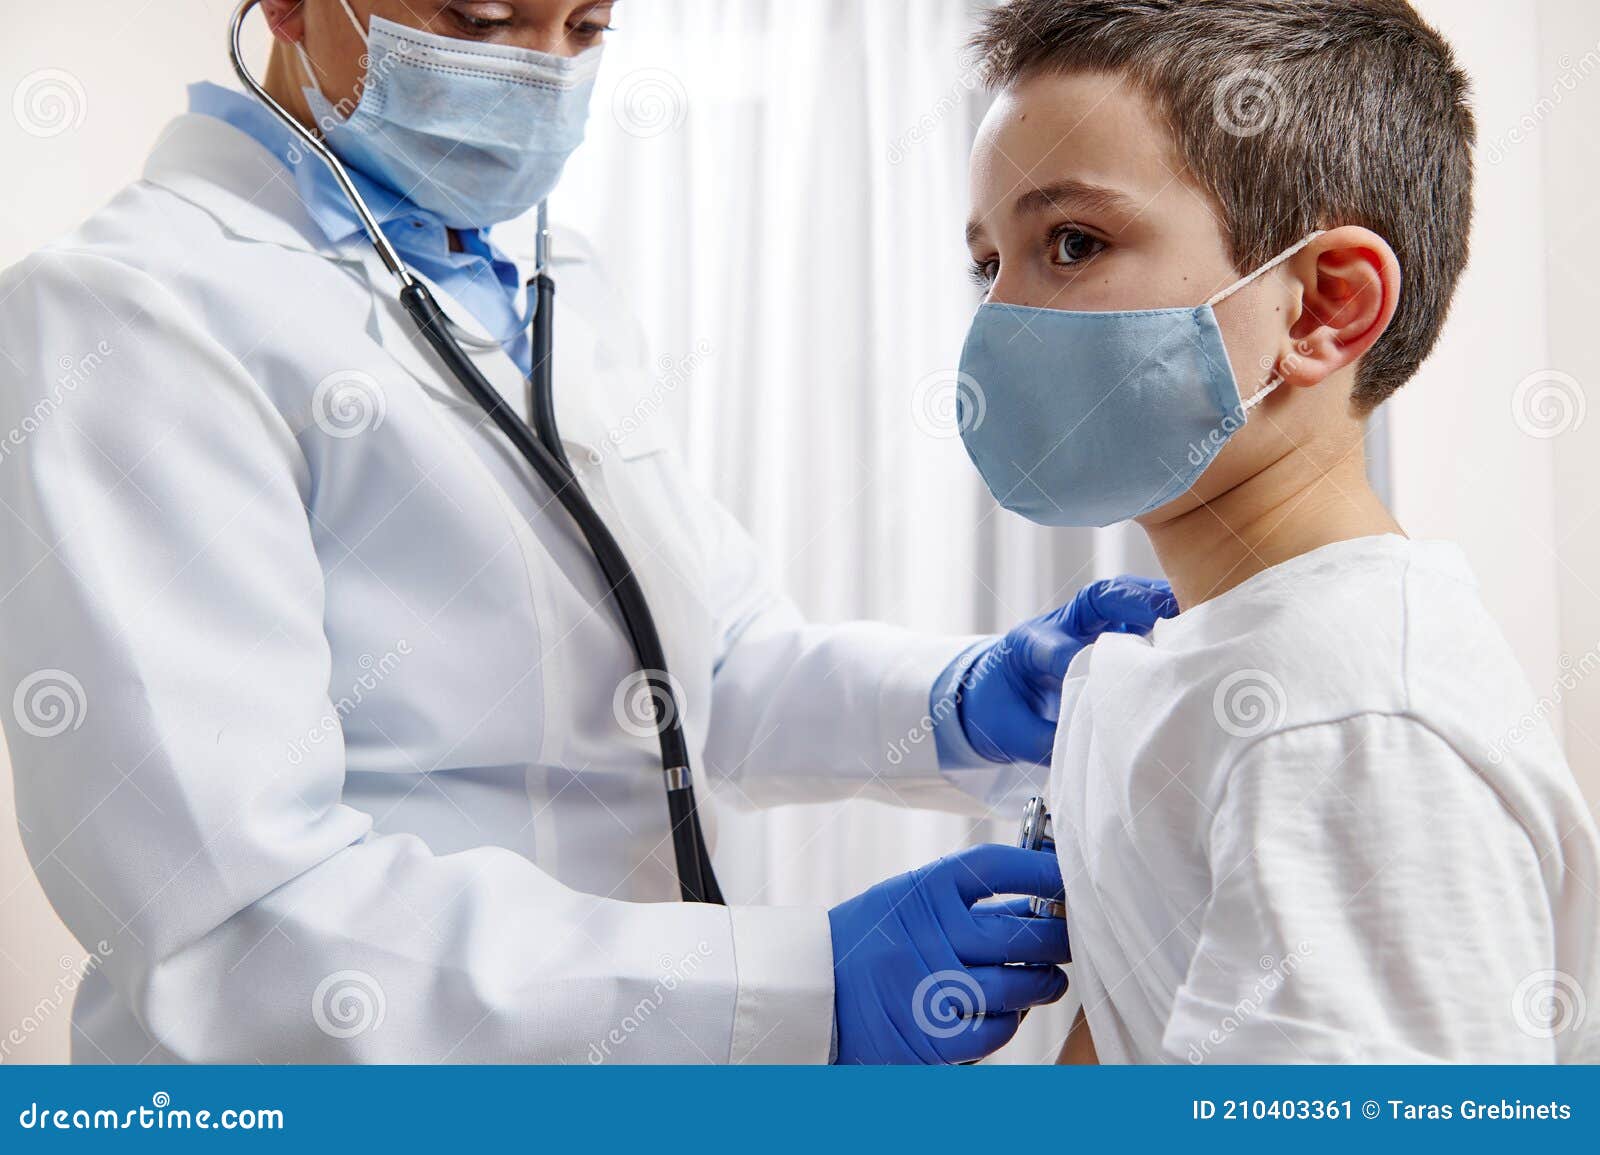 doctor pediatrician in medical uniform uses a stethoscope while auscultating a little boy in protective medical mask